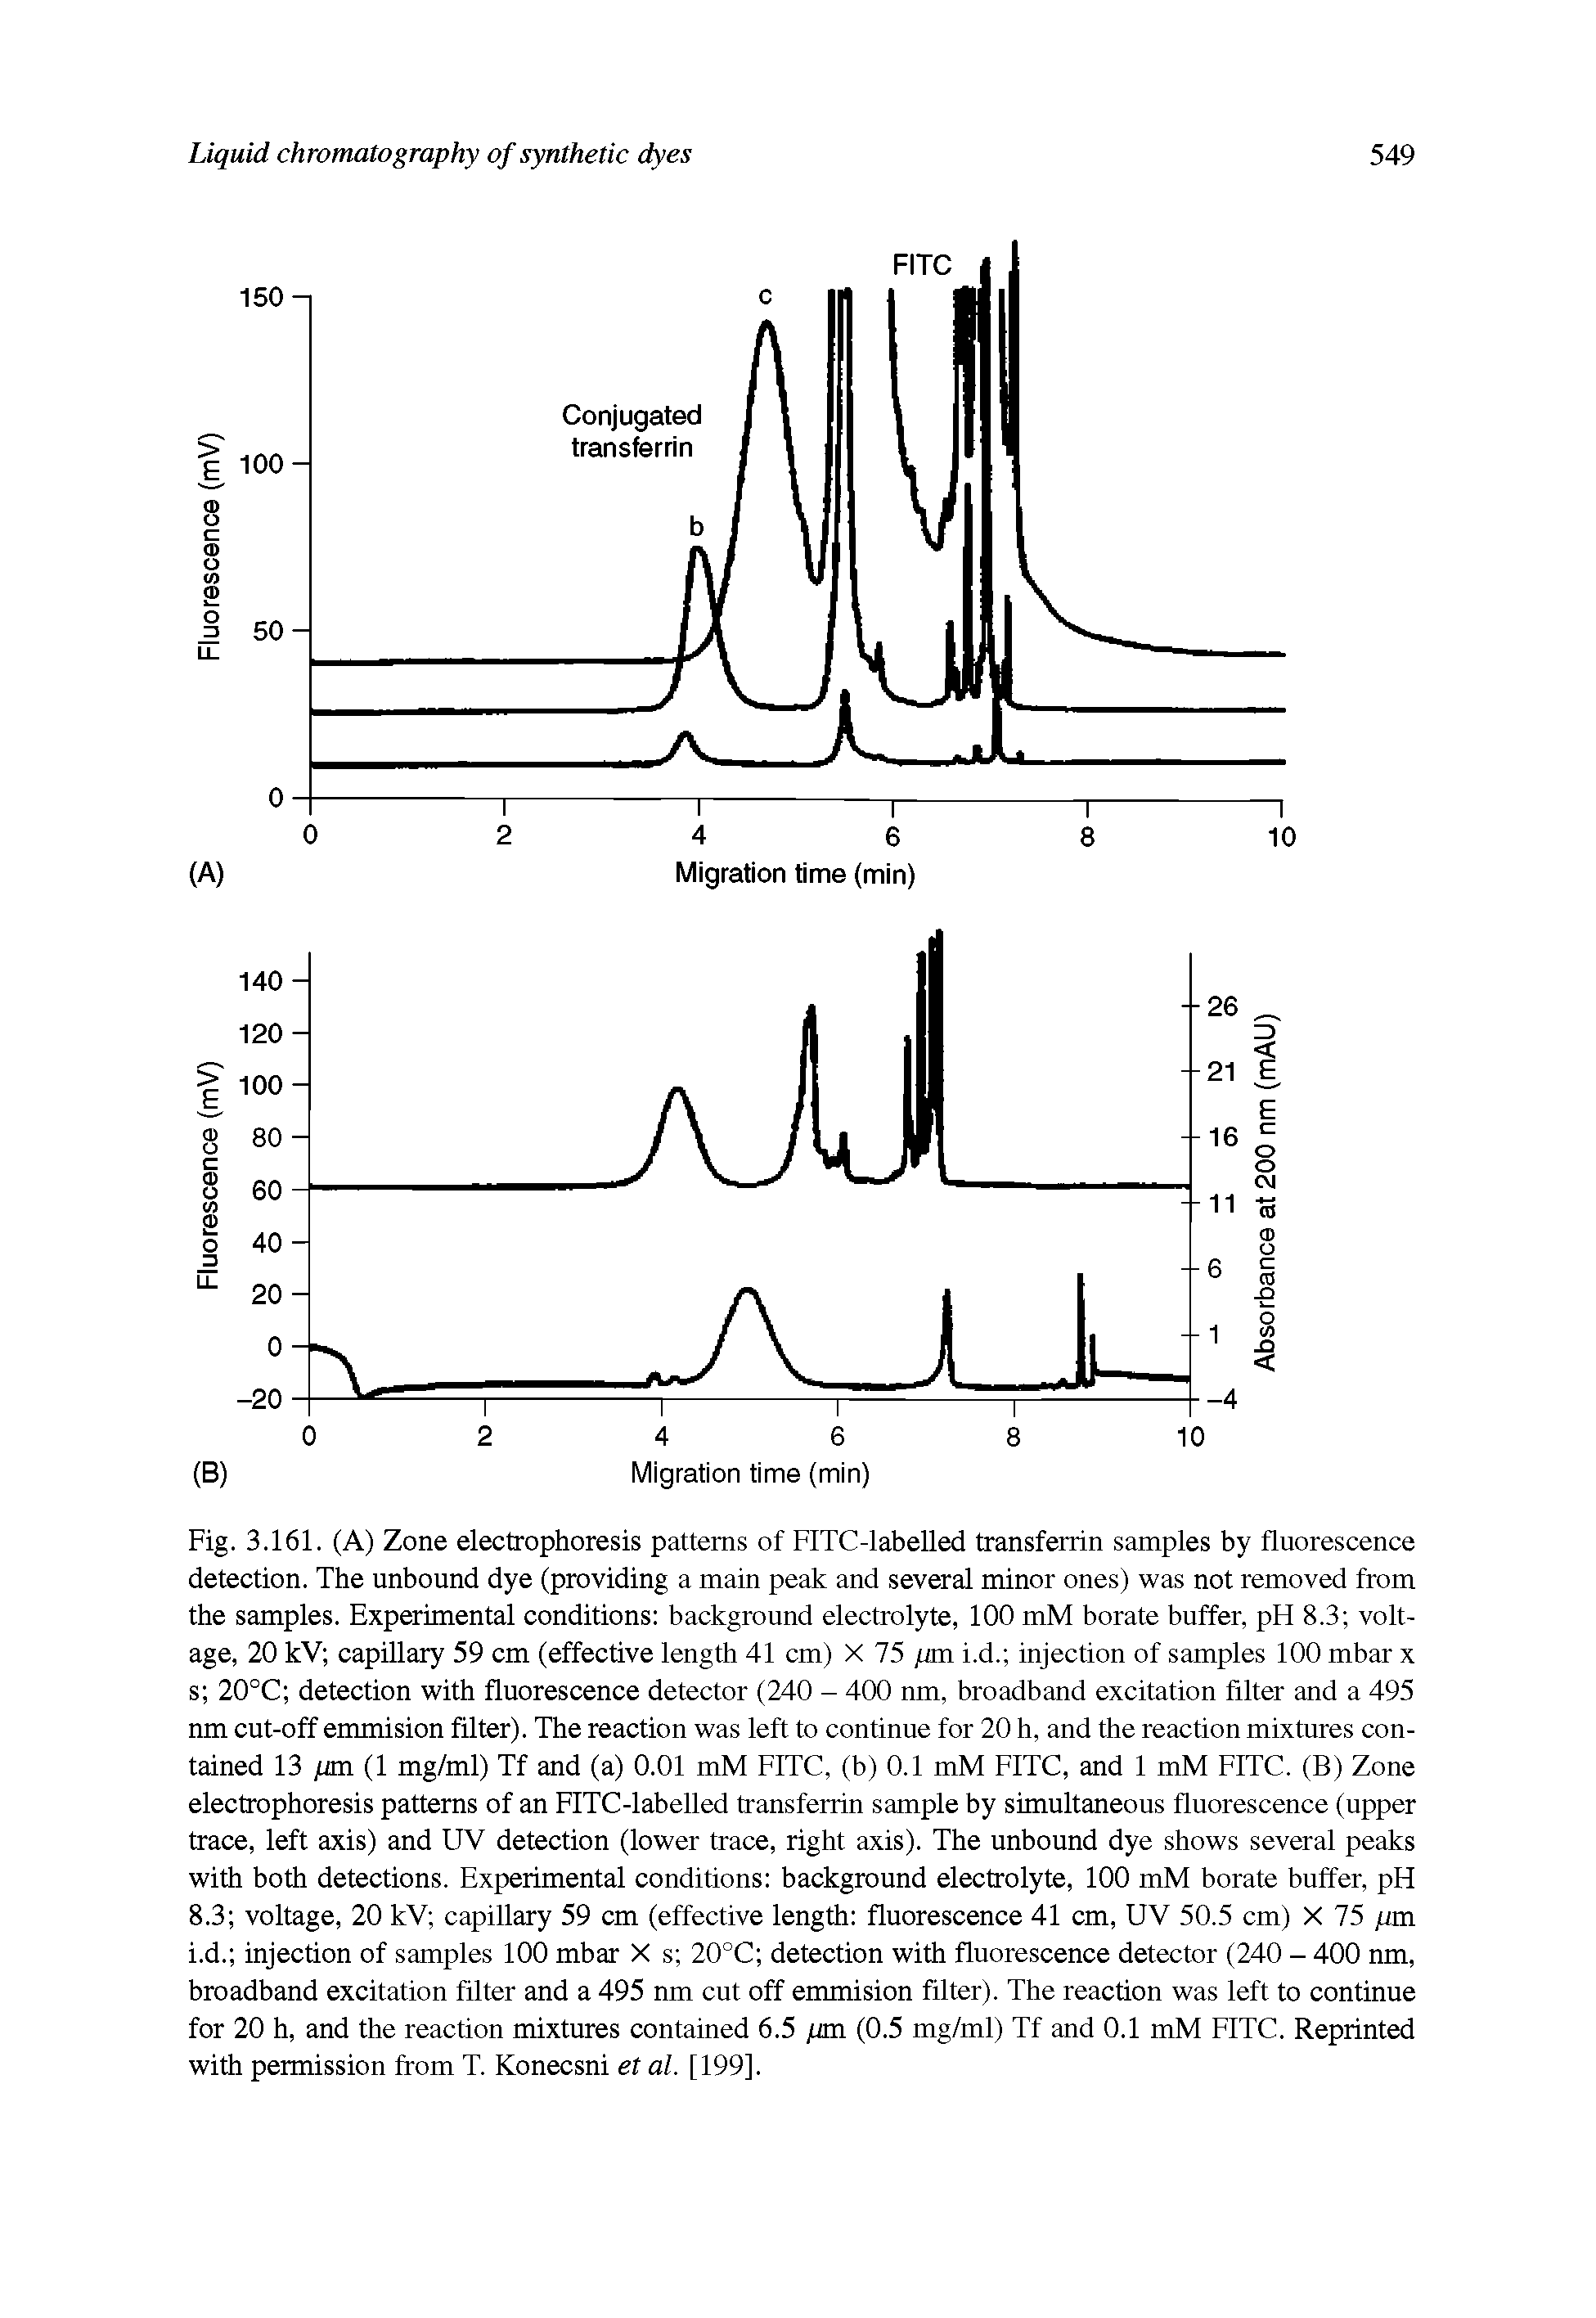 Fig. 3.161. (A) Zone electrophoresis patterns of FITC-labelled transferrin samples by fluorescence detection. The unbound dye (providing a main peak and several minor ones) was not removed from the samples. Experimental conditions background electrolyte, 100 mM borate buffer, pH 8.3 voltage, 20 kV capillary 59 cm (effective length 41 cm) X 75 pm i.d. injection of samples 100 mbar x s 20°C detection with fluorescence detector (240 - 400 nm, broadband excitation filter and a 495 nm cut-off emmision filter). The reaction was left to continue for 20 h, and the reaction mixtures contained 13 pm (1 mg/ml) Tf and (a) 0.01 mM FITC, (b) 0.1 mM FITC, and 1 mM FITC. (B) Zone electrophoresis patterns of an FITC-labelled transferrin sample by simultaneous fluorescence (upper trace, left axis) and UV detection (lower trace, right axis). The unbound dye shows several peaks with both detections. Experimental conditions background electrolyte, 100 mM borate buffer, pH 8.3 voltage, 20 kV capillary 59 cm (effective length fluorescence 41 cm, UV 50.5 cm) X 75 pm i.d. injection of samples 100 mbar X s 20°C detection with fluorescence detector (240 - 400 nm, broadband excitation filter and a 495 nm cut off emmision filter). The reaction was left to continue for 20 h, and the reaction mixtures contained 6.5 pm (0.5 mg/ml) Tf and 0.1 mM FITC. Reprinted with permission from T. Konecsni et al. [199].